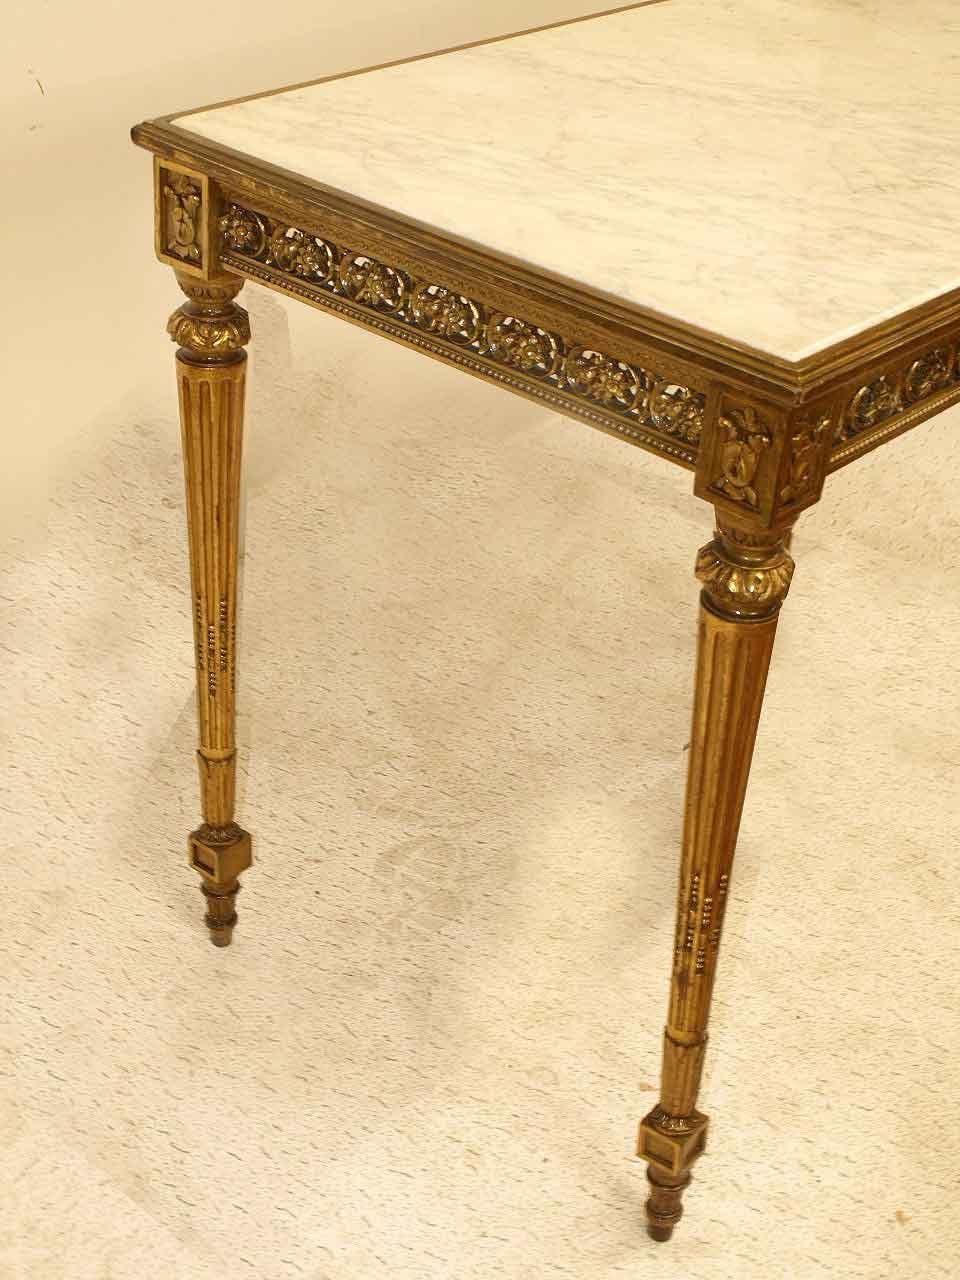 French Louis XVI marble top center table, the top with beautiful veining and beveled edge set inside a simple edge molding. This four sided gilt table has a intricately carved and reticulated frieze, nicely tapered, carved and reeded legs featuring